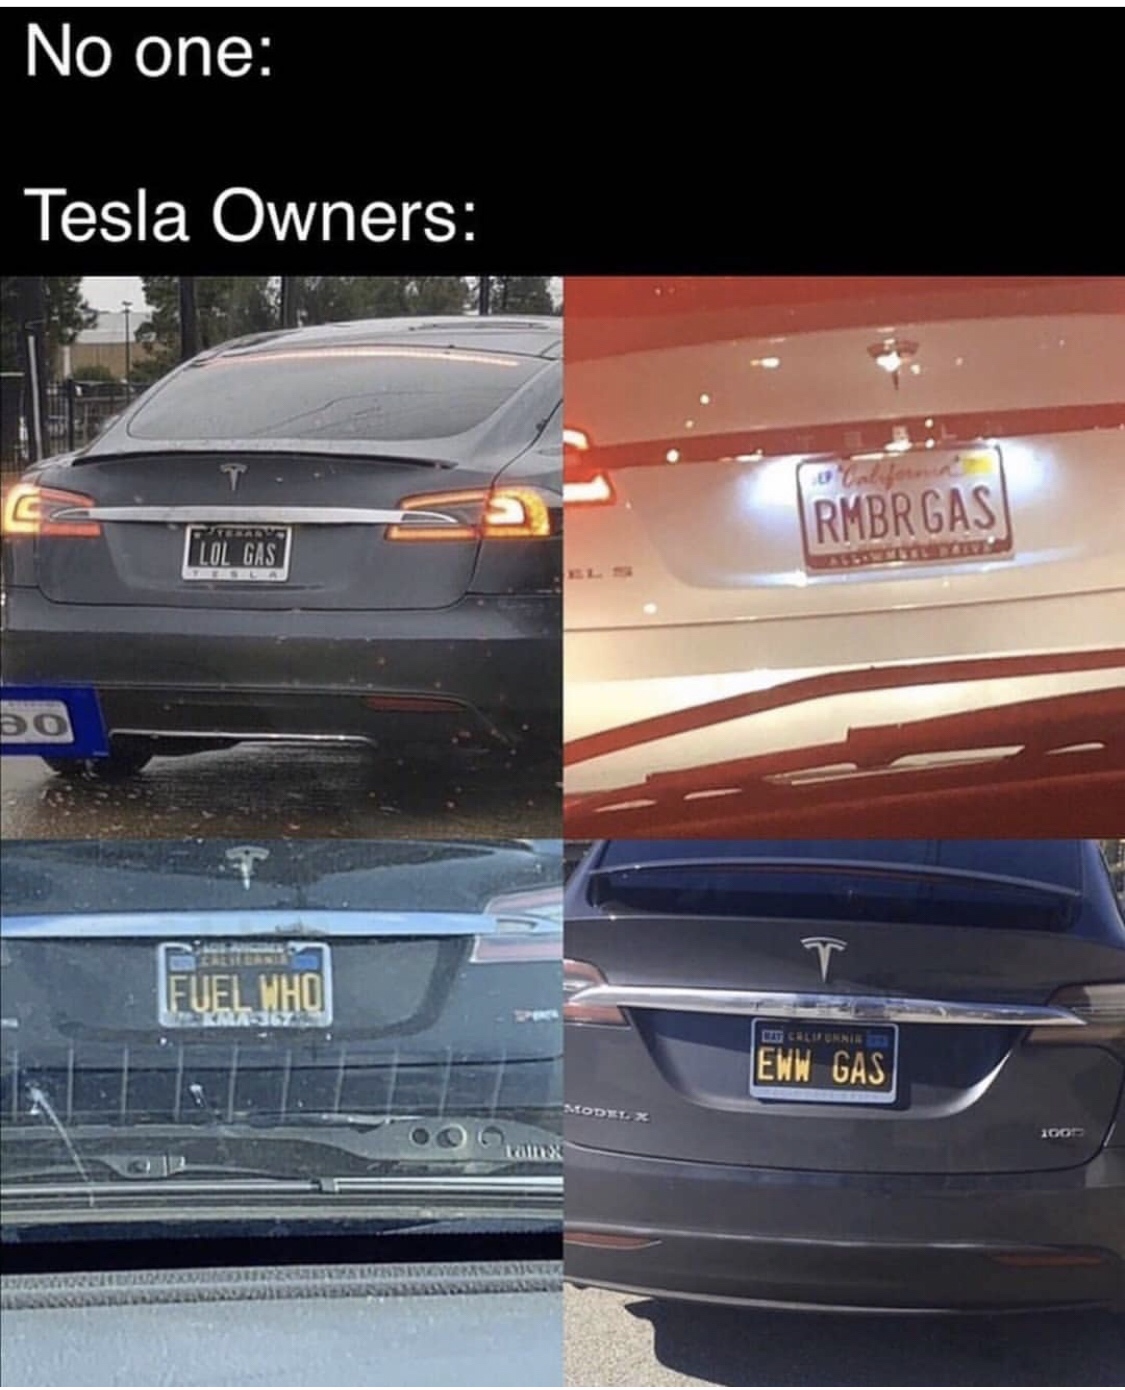 tesla owners meme - No one Tesla Owners Rmbrgas Lol Gasi Fuel Who It Chure Eww Gas 1001